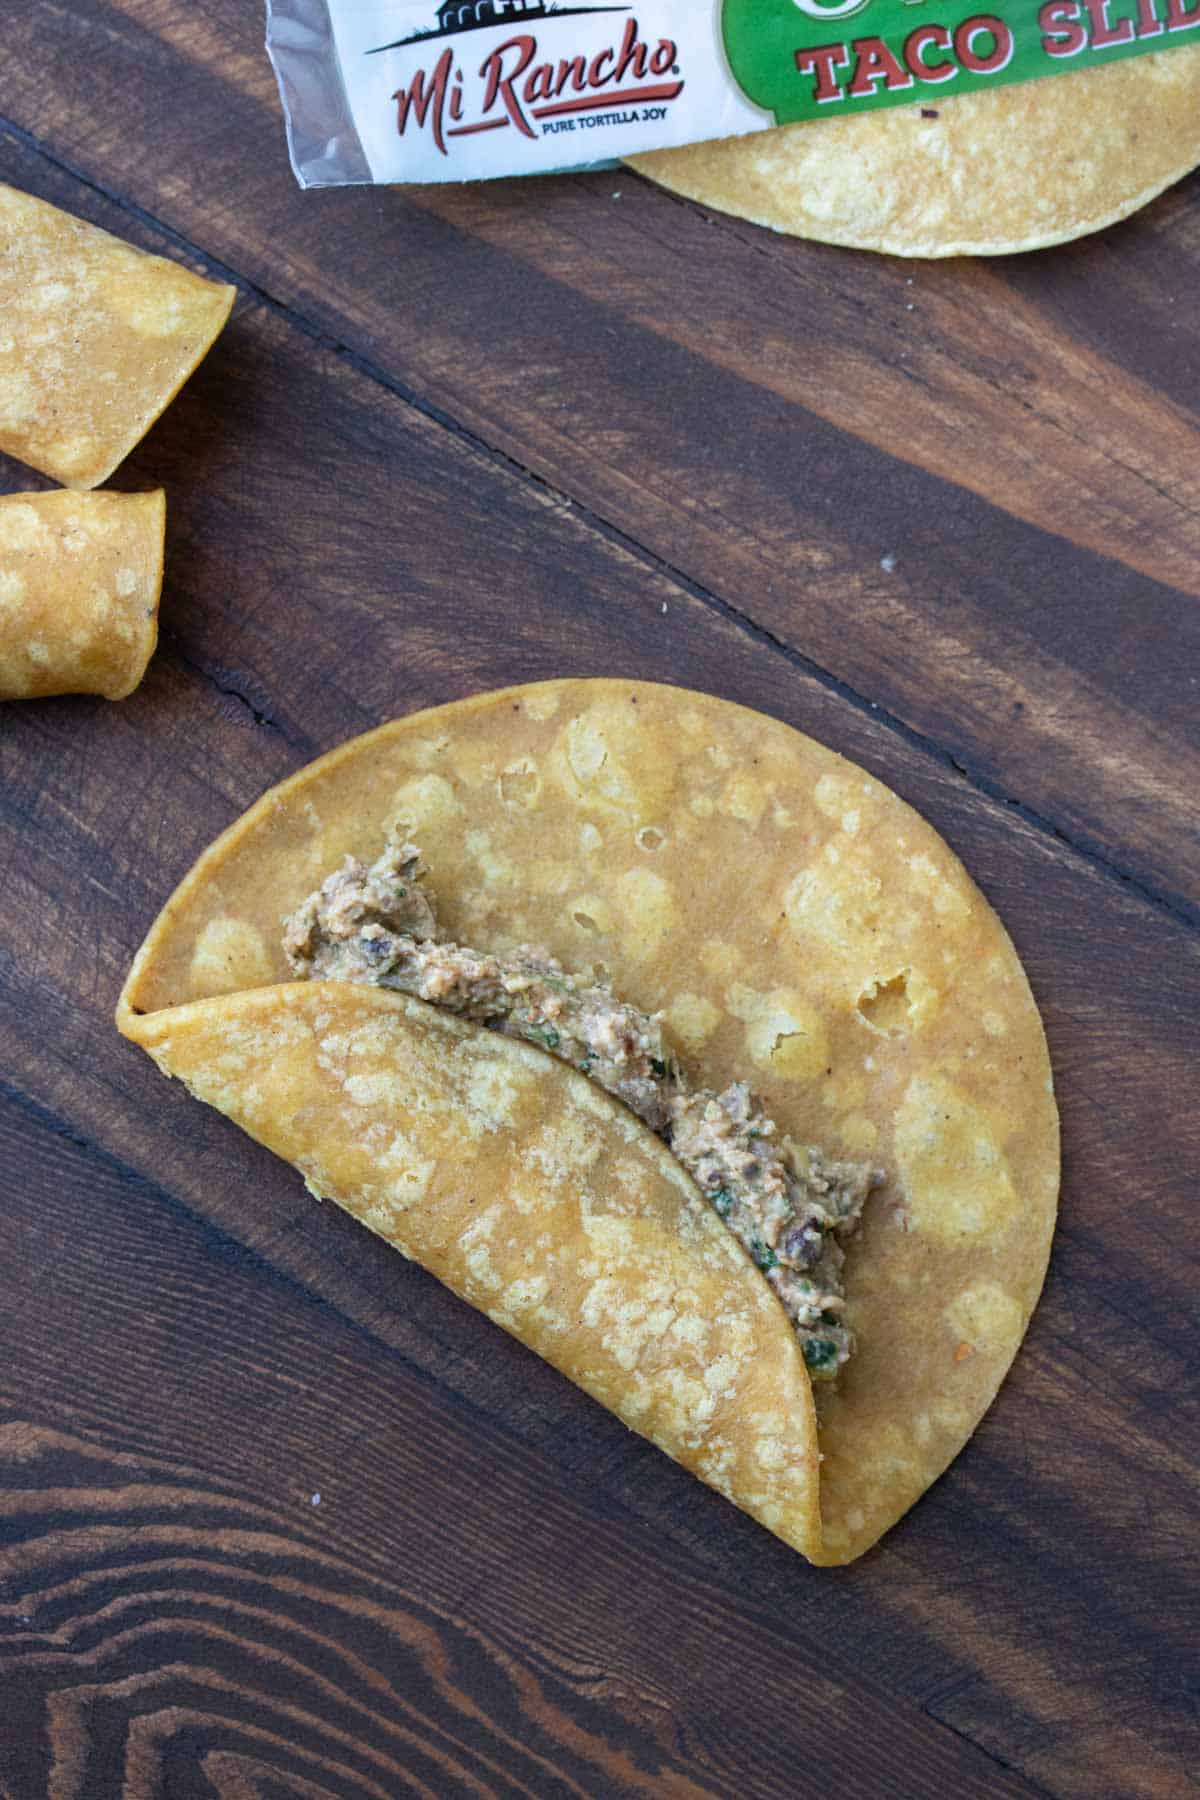 Corn tortilla with bean filling in the center and the side folded over it